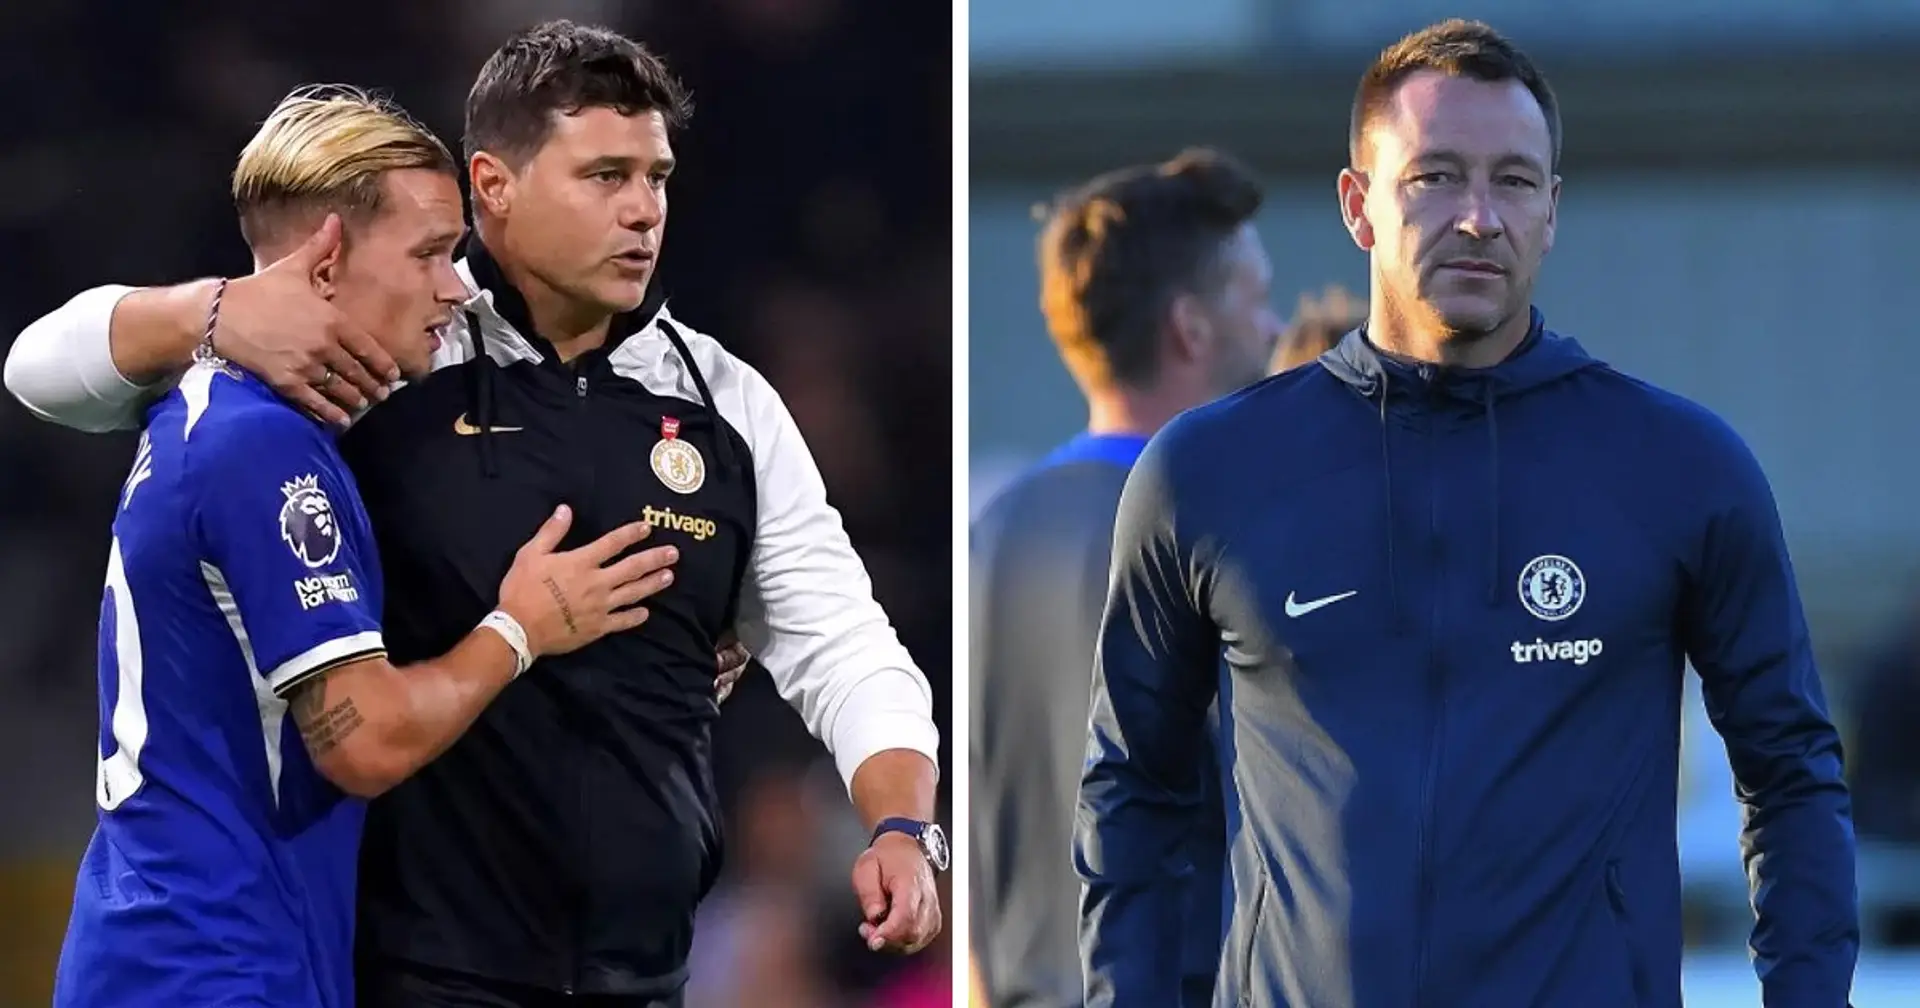 'The players growing into their roles': John Terry wants Mauricio Pochettino to be given more time at Chelsea